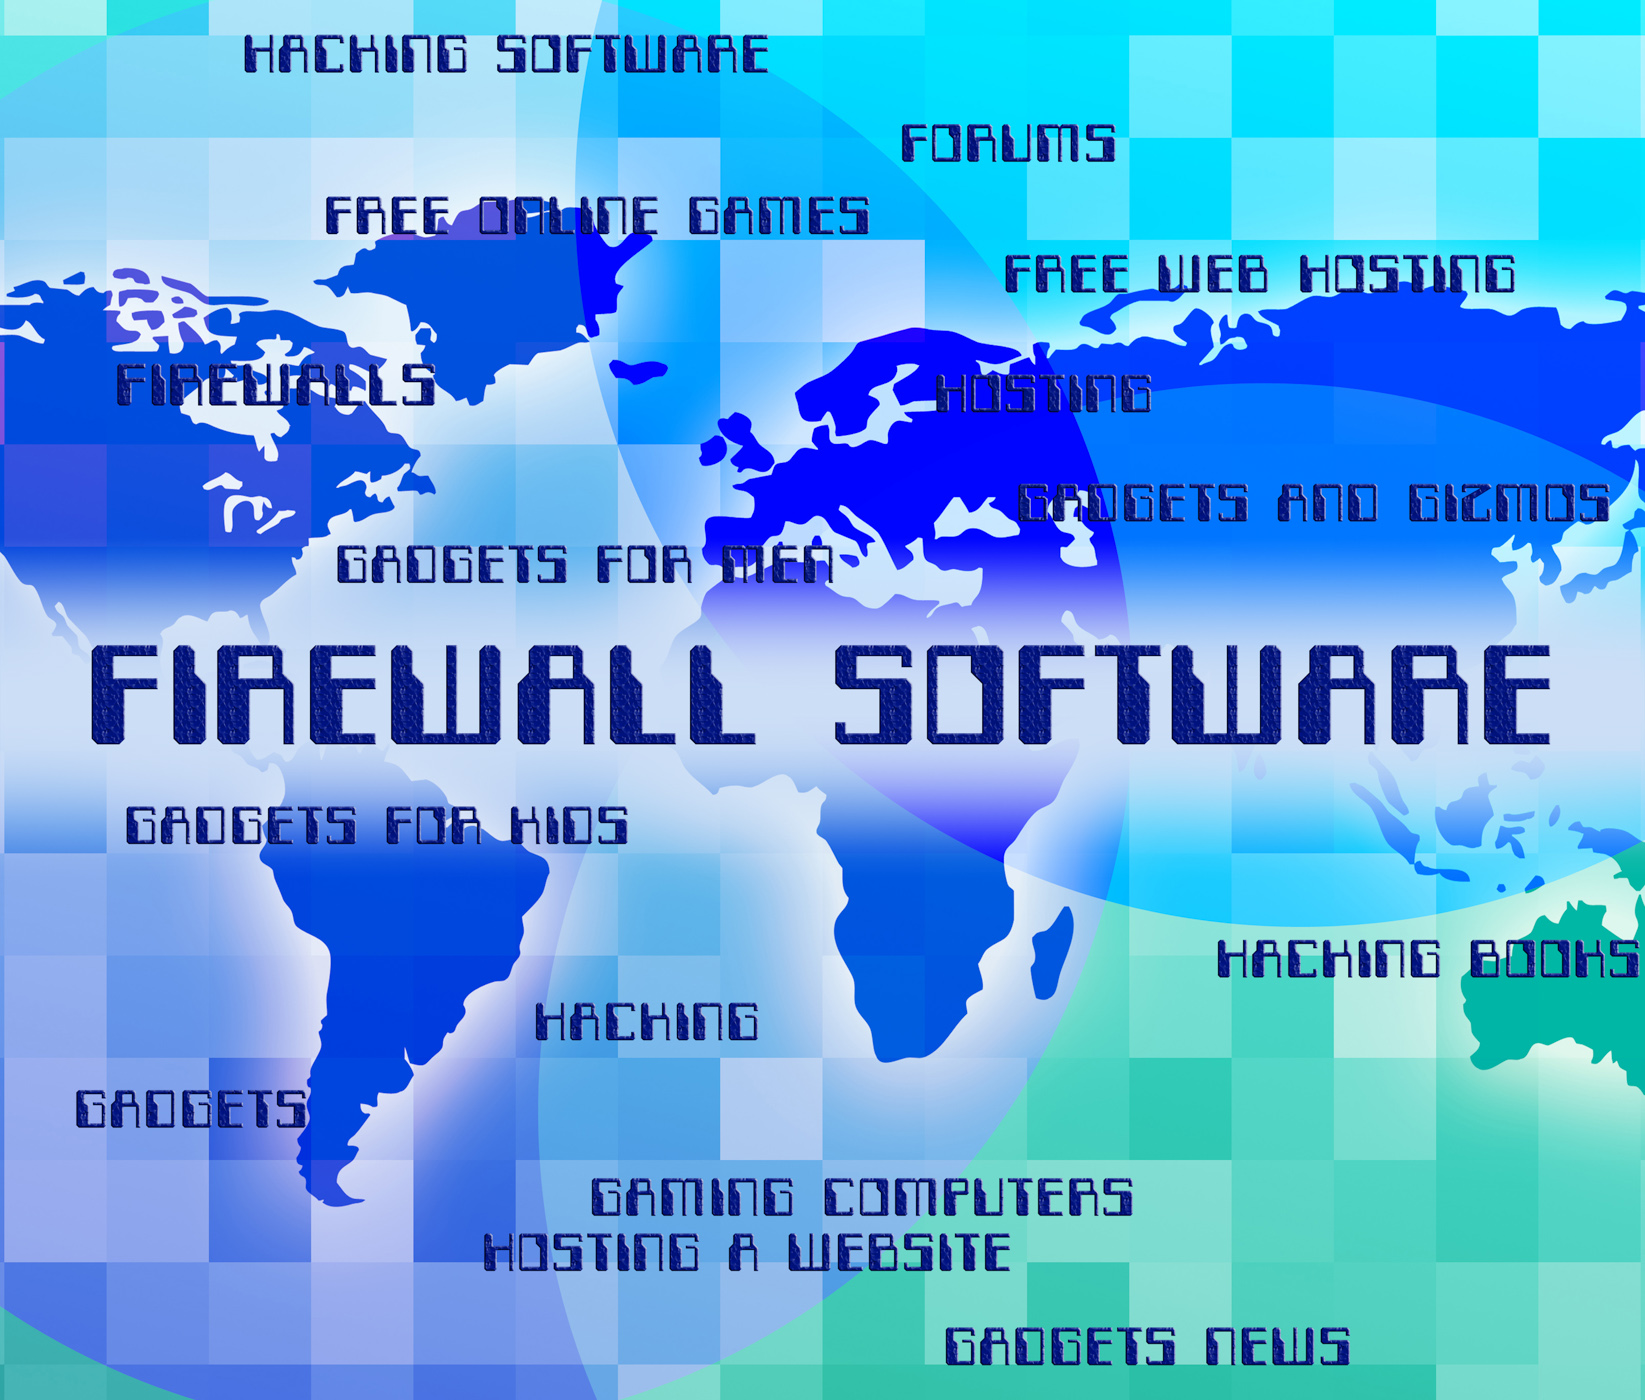 Firewall software means no access and application photo